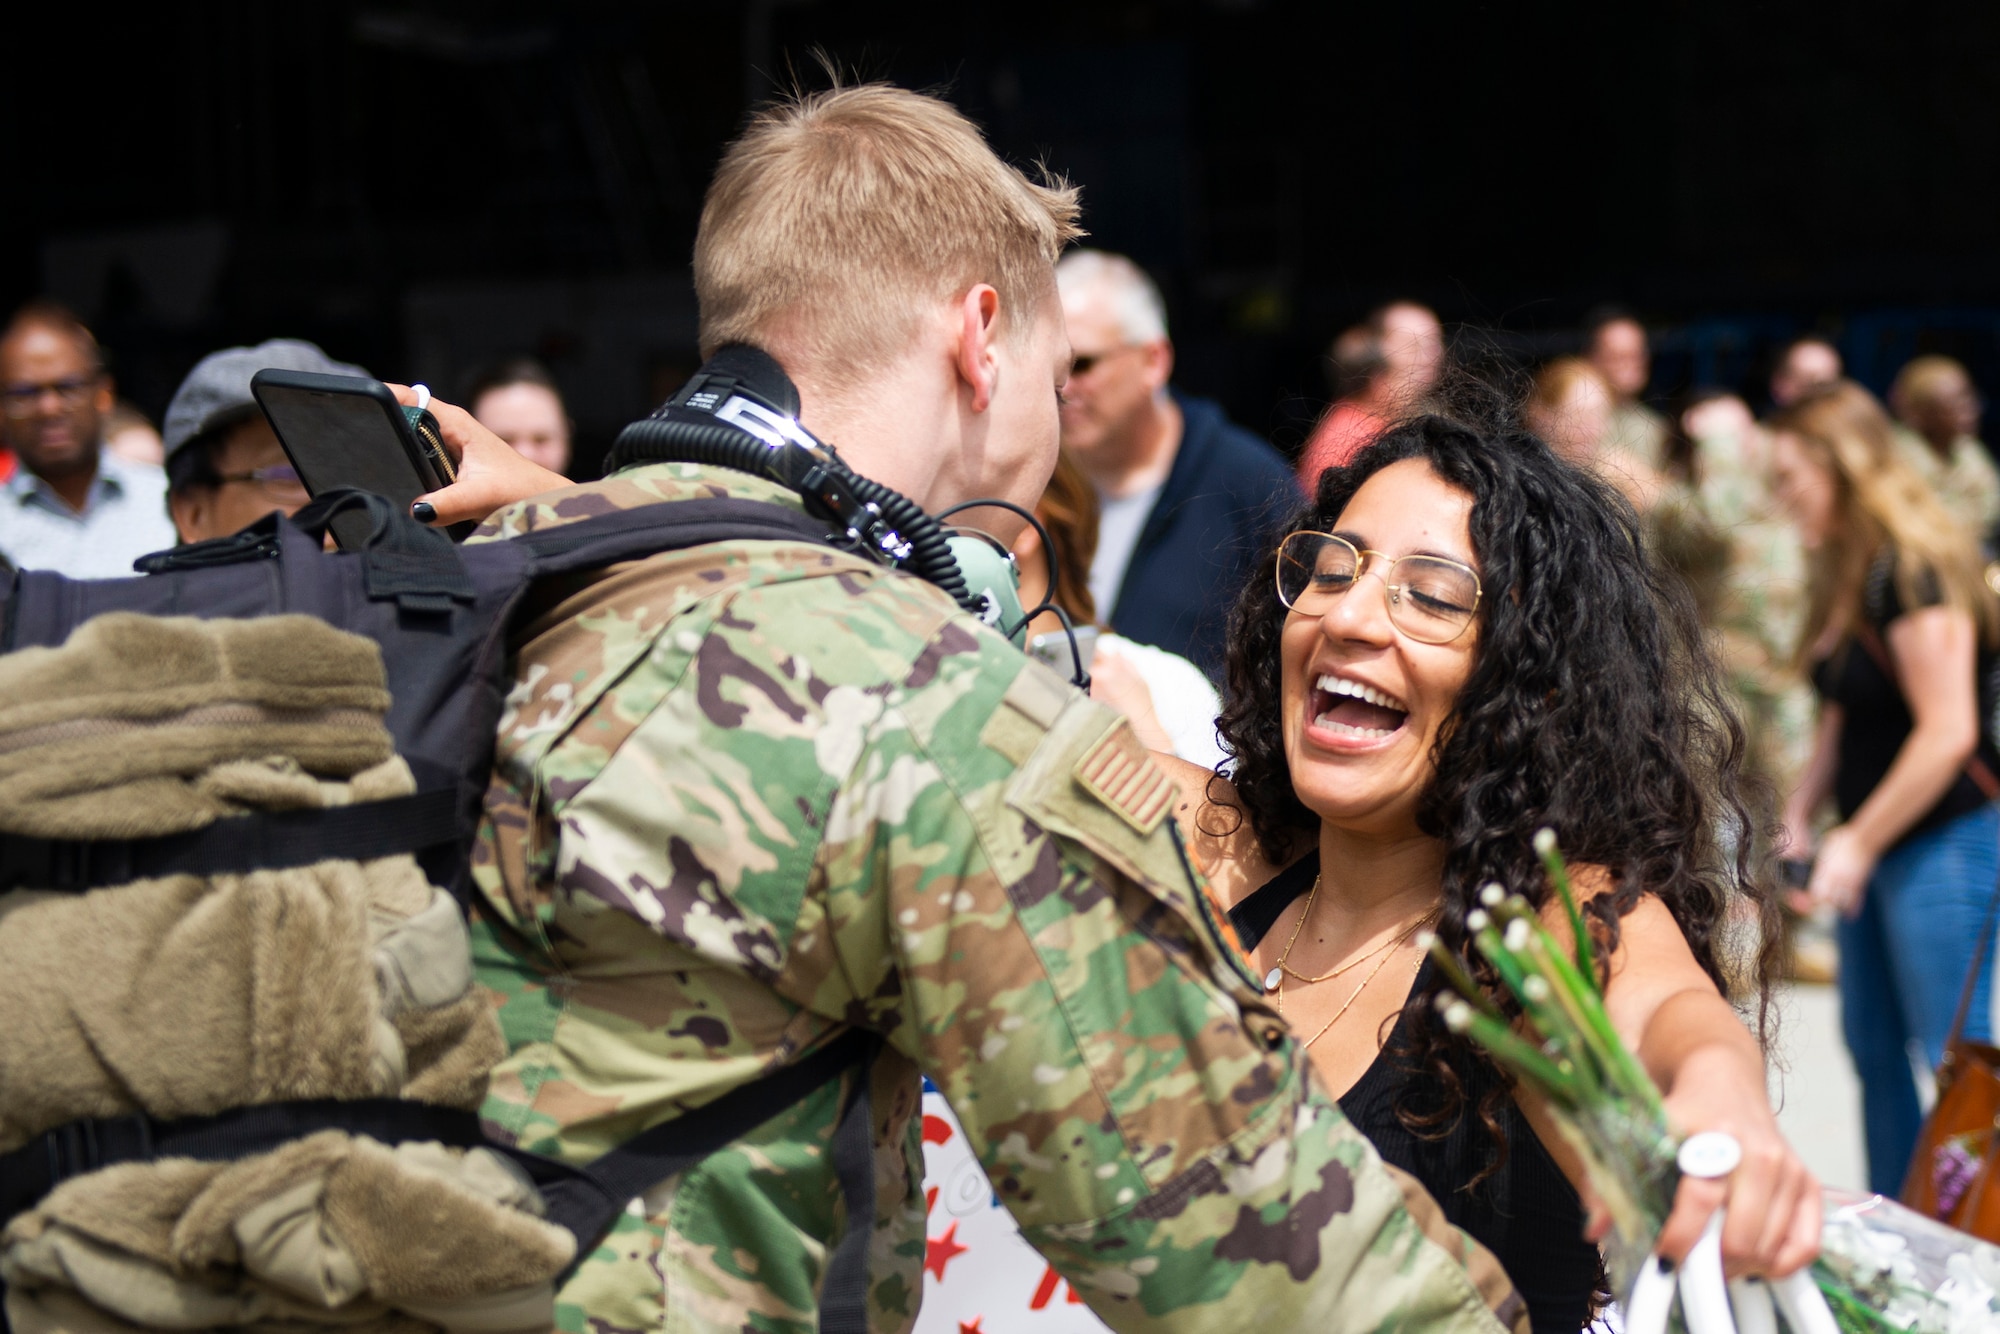 Sofia Garduño runs to meet her boyfriend Senior Airmen Josiah Goodman, 934 Maintenance Squadron aerospace propulsion technician, after returning from a three-month deployment to Europe on May 19, 2022, at Minneapolis-St. Paul Air Reserve Station. The 934th Airlift Wing performed tactical airlifts and vital aeromedical evacuations in support of U.S. European Command to assure our Allies and Partners in the region and deter any future aggression. (U.S. Air Force Picture by Chris Farley)